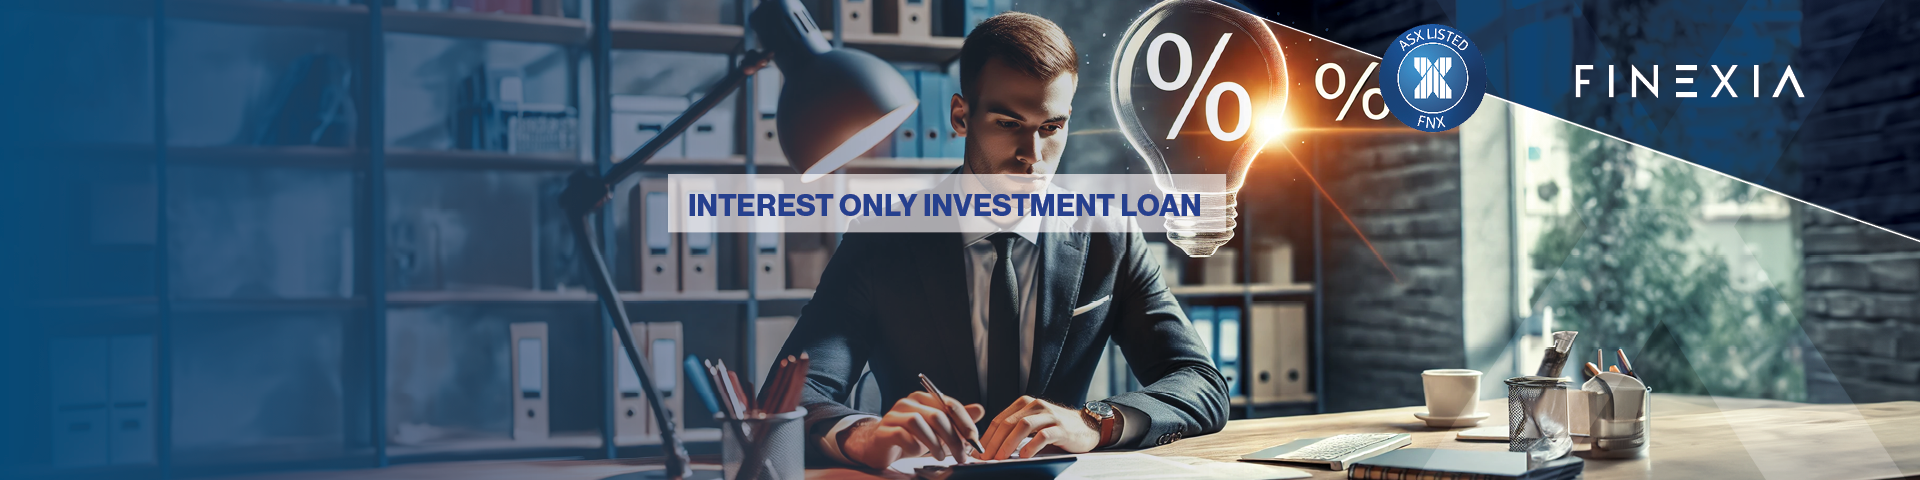 Maximise Your Property Investments with an Interest Only Investment Loan